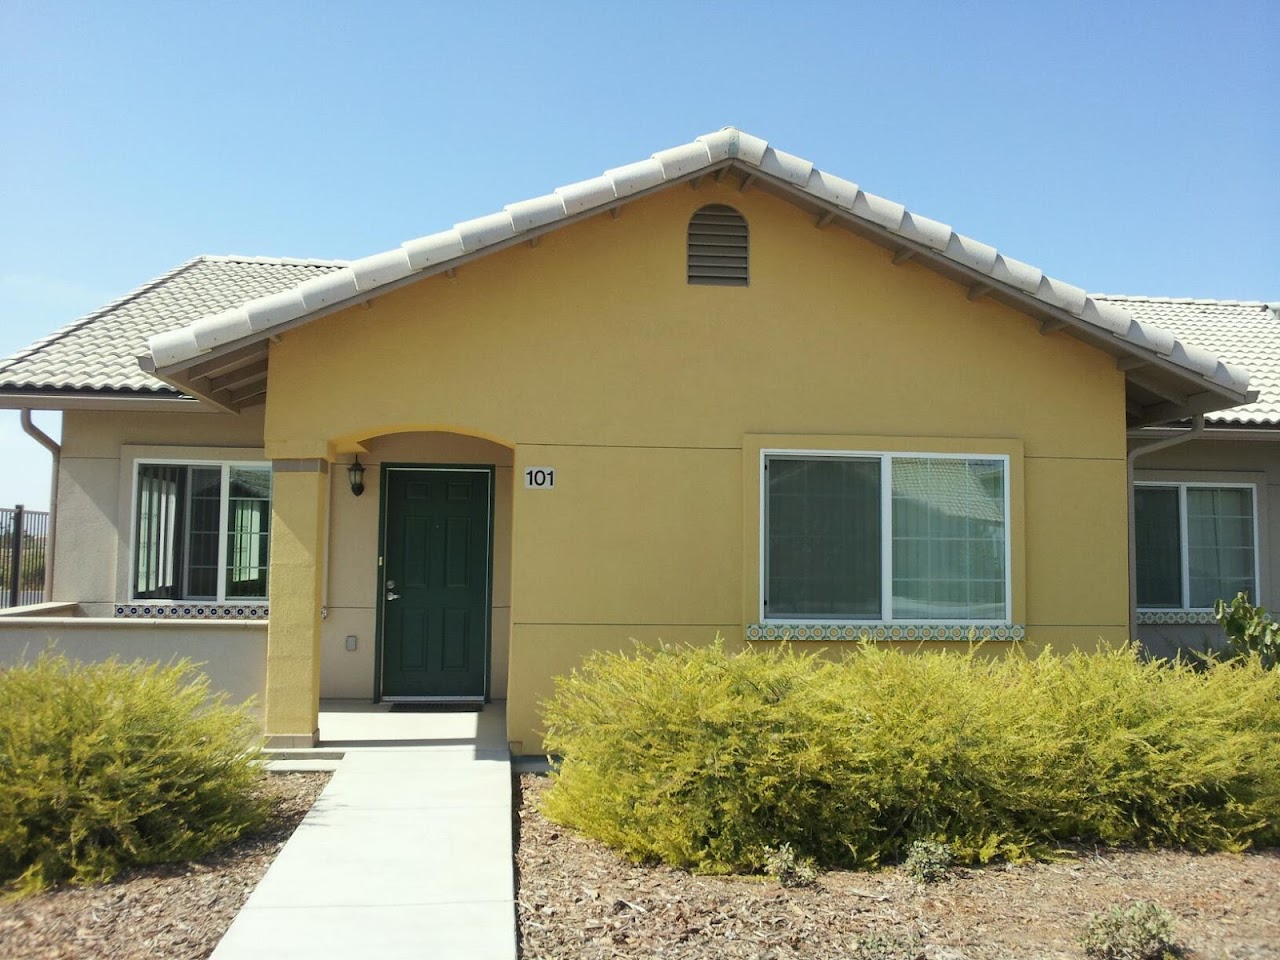 Photo of GOSHEN VILLAGE. Affordable housing located at 30940 RD 72 VISALIA, CA 93291